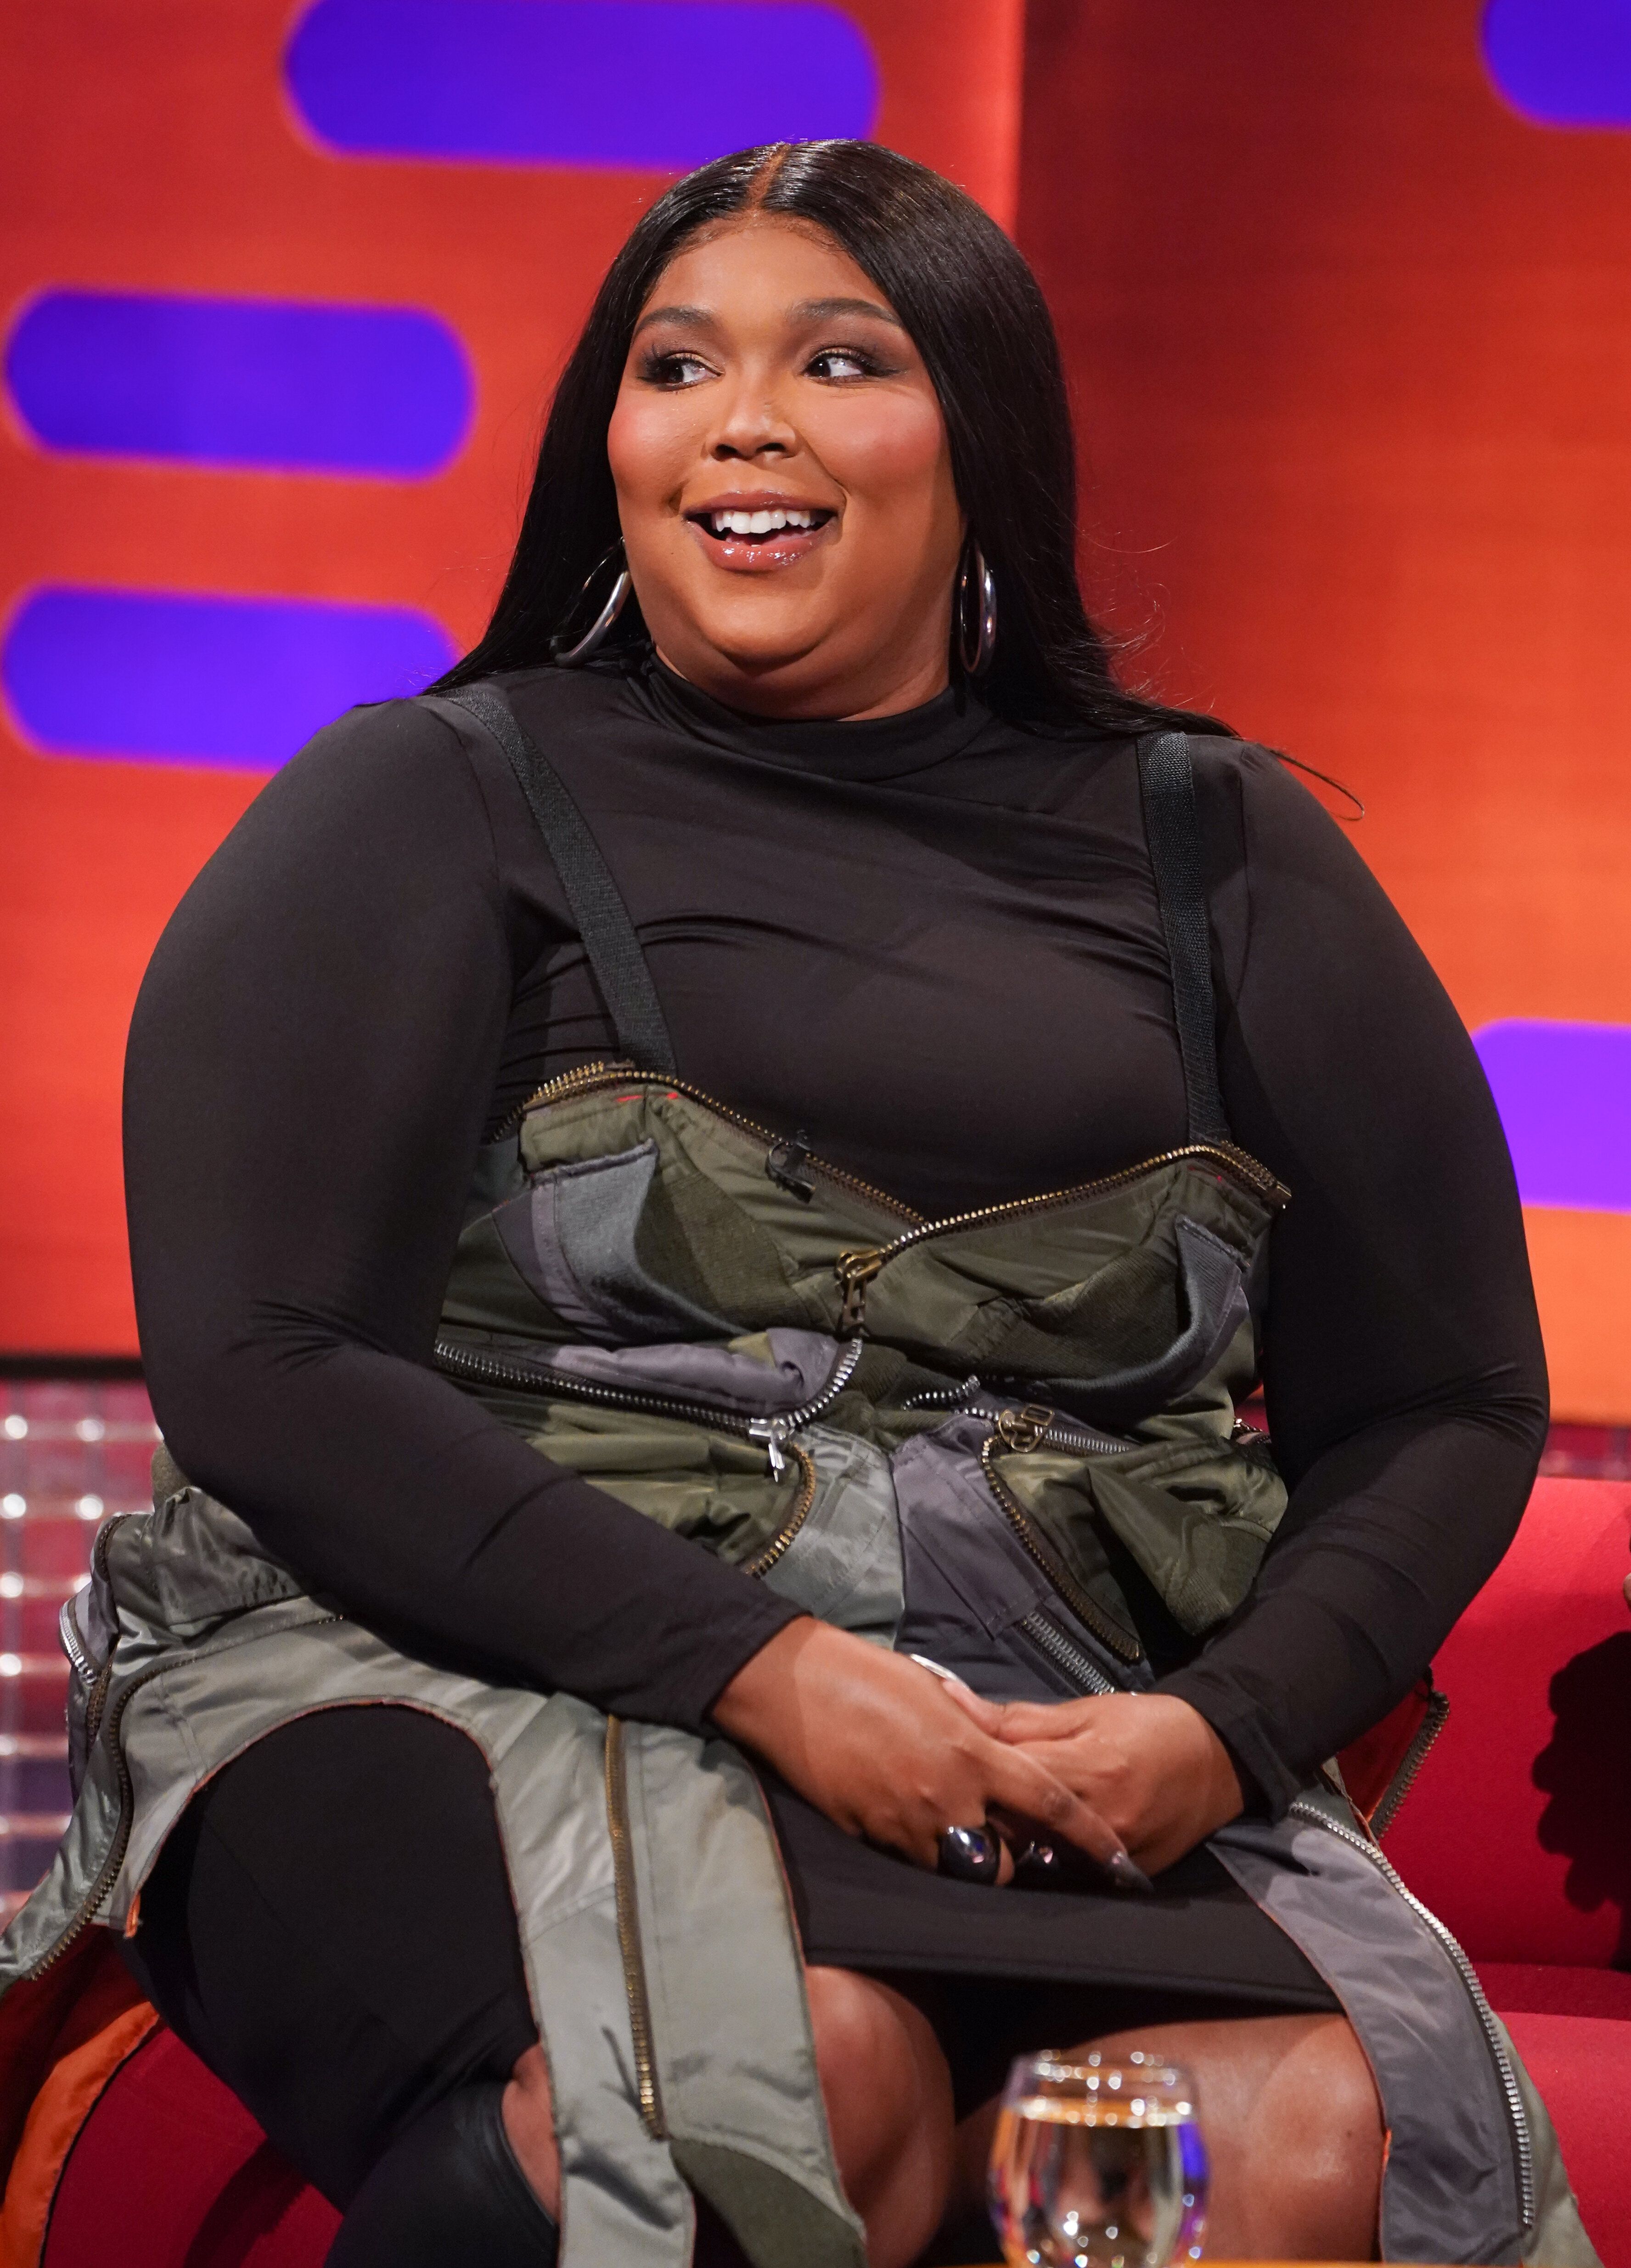 Lizzo was a guest on The Graham Norton Show on Friday